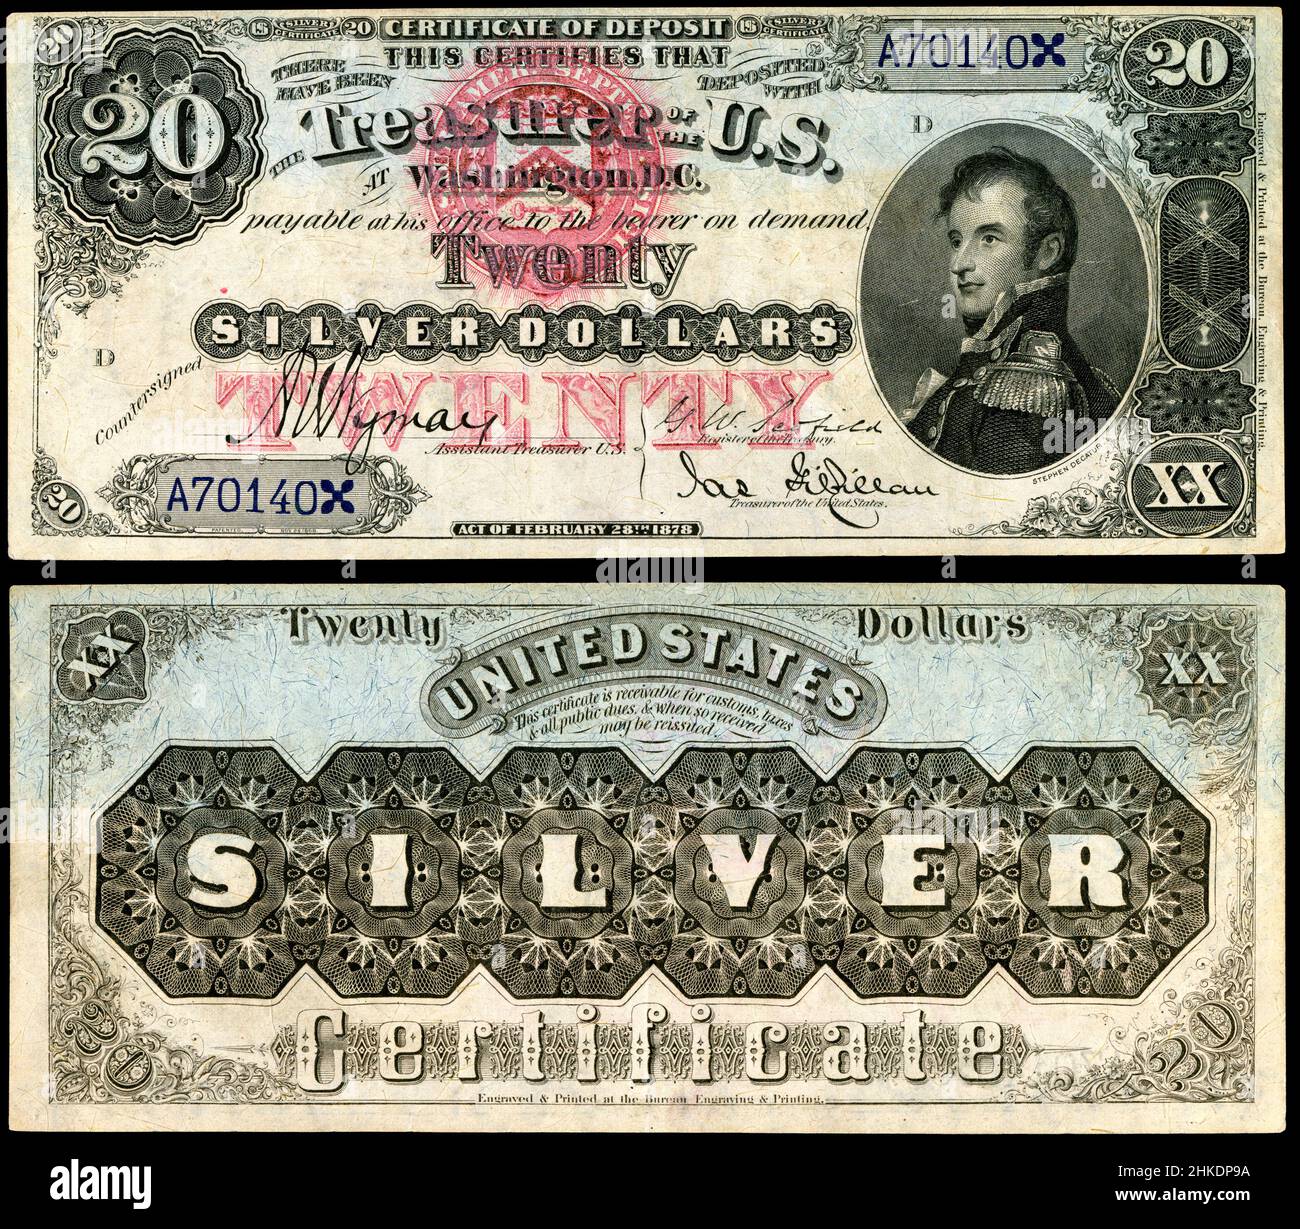 $20 Silver Certificate, Series of 1878, depicting Stephen Decatur. Engraved signatures of Scofield (Register of the Treasury) and Gilfillan (Treasurer of the United States). Countersigned by Albert U. Wyman. Stock Photo